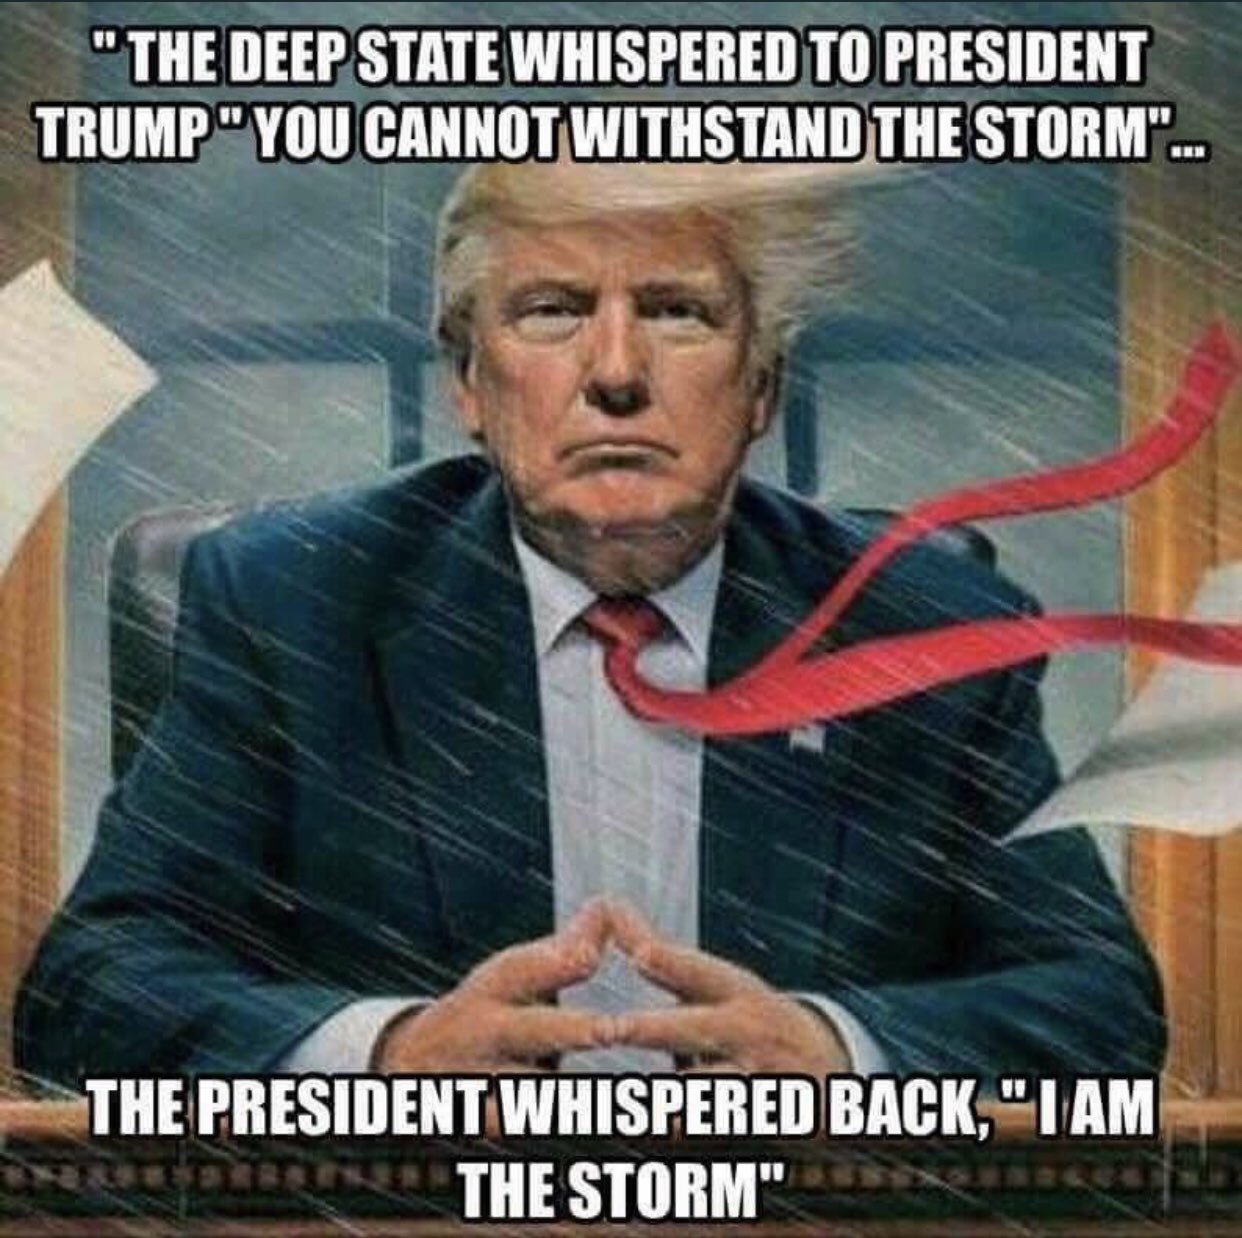 The Calm Before The Storm - QAnon is The Real Deal!